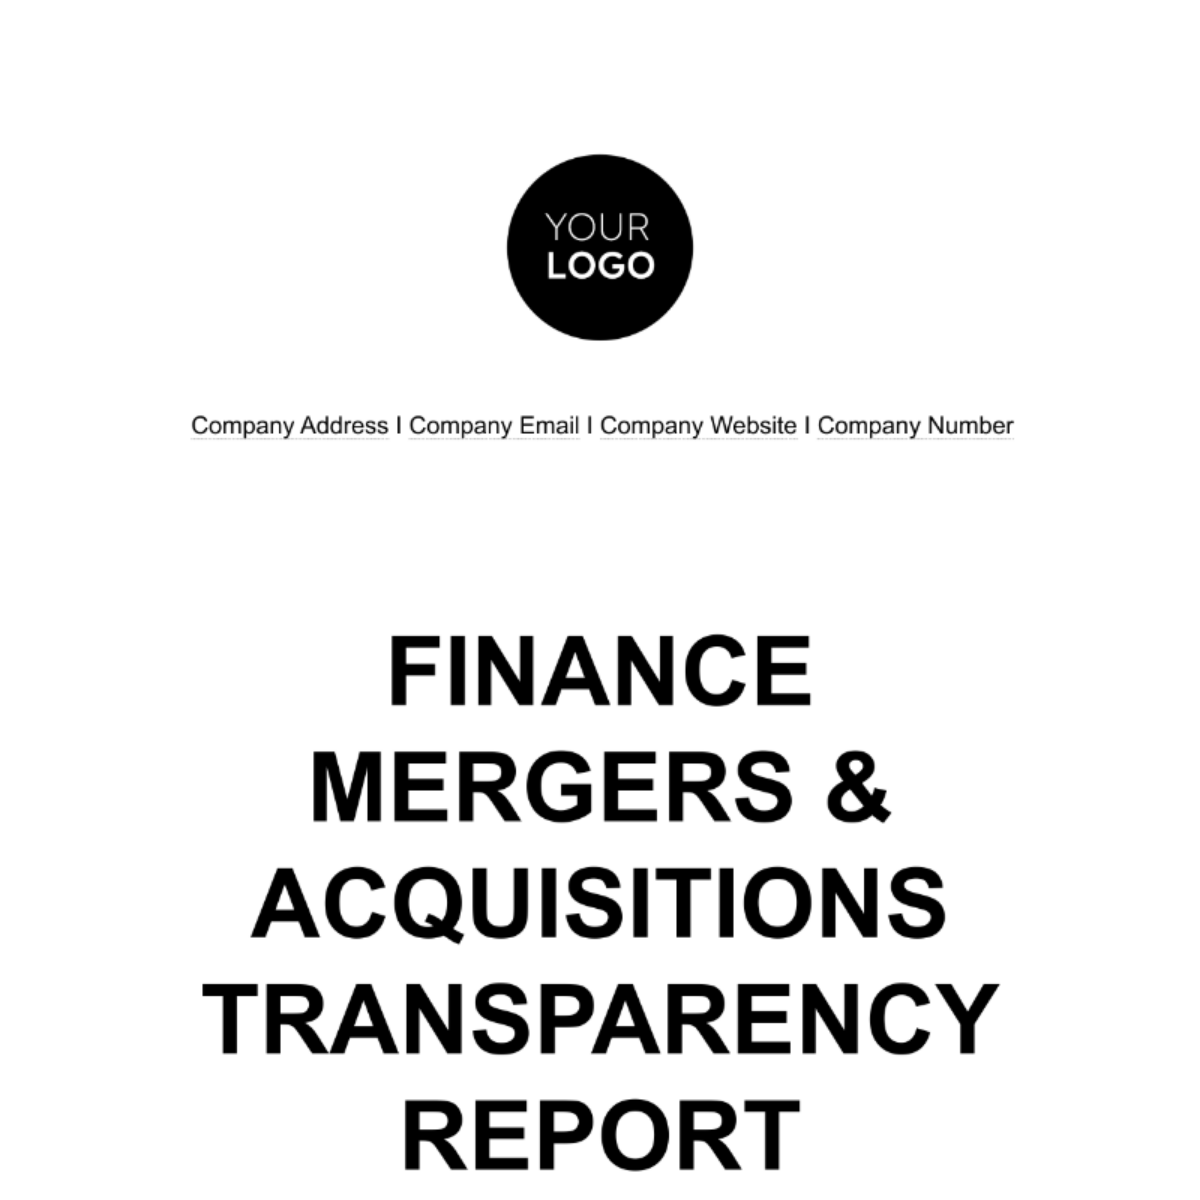 Finance Mergers & Acquisitions Transparency Report Template